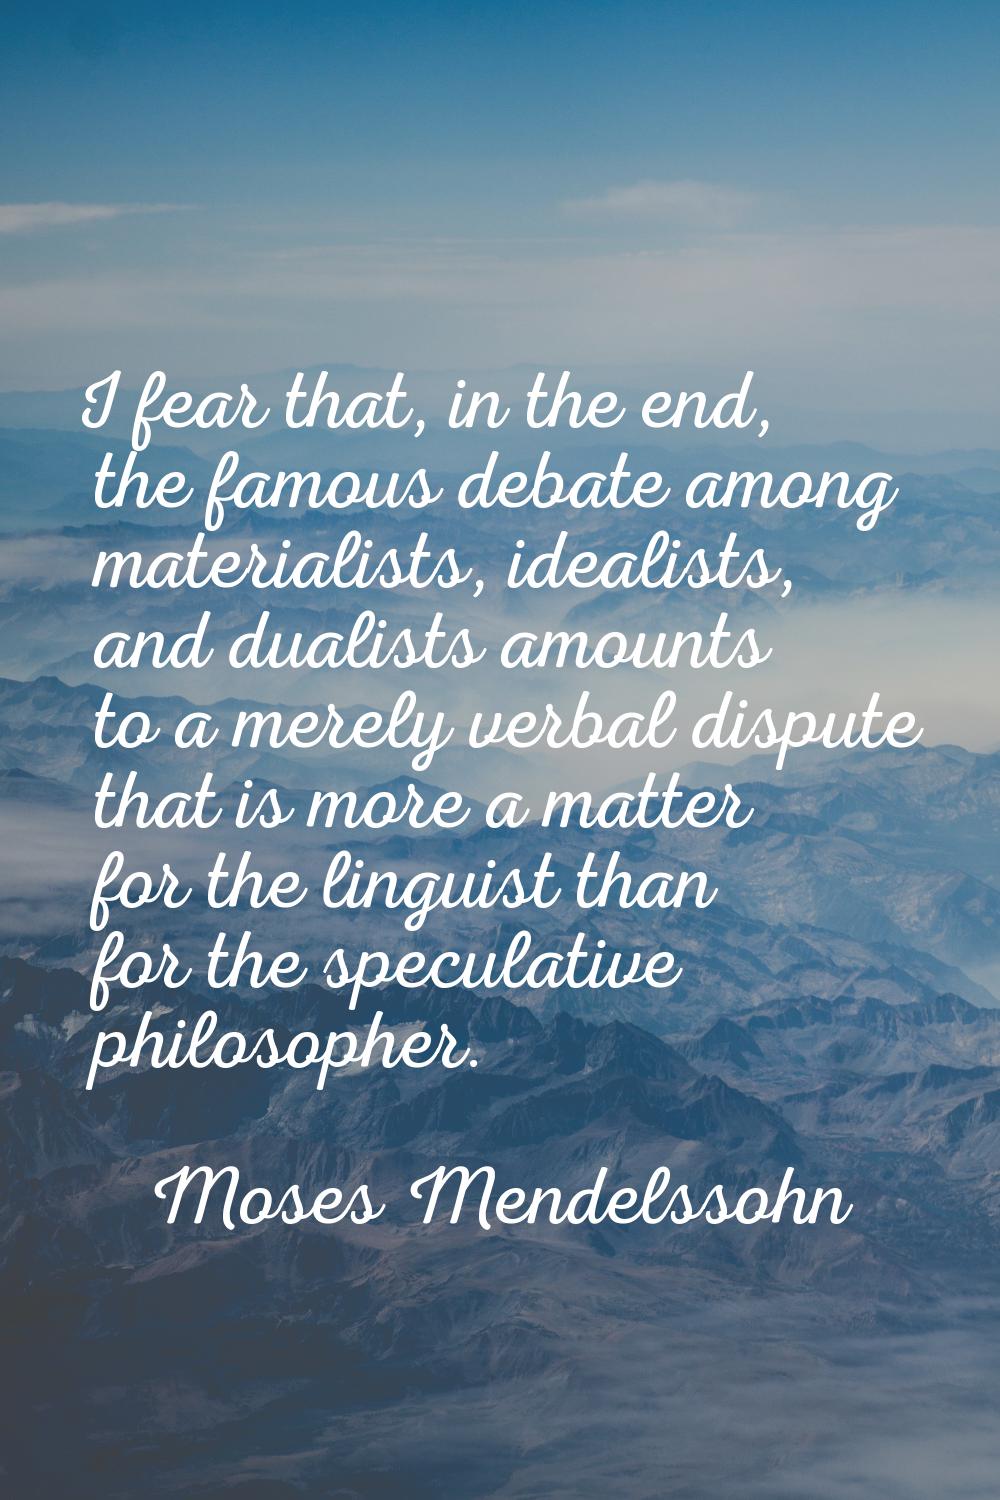 I fear that, in the end, the famous debate among materialists, idealists, and dualists amounts to a